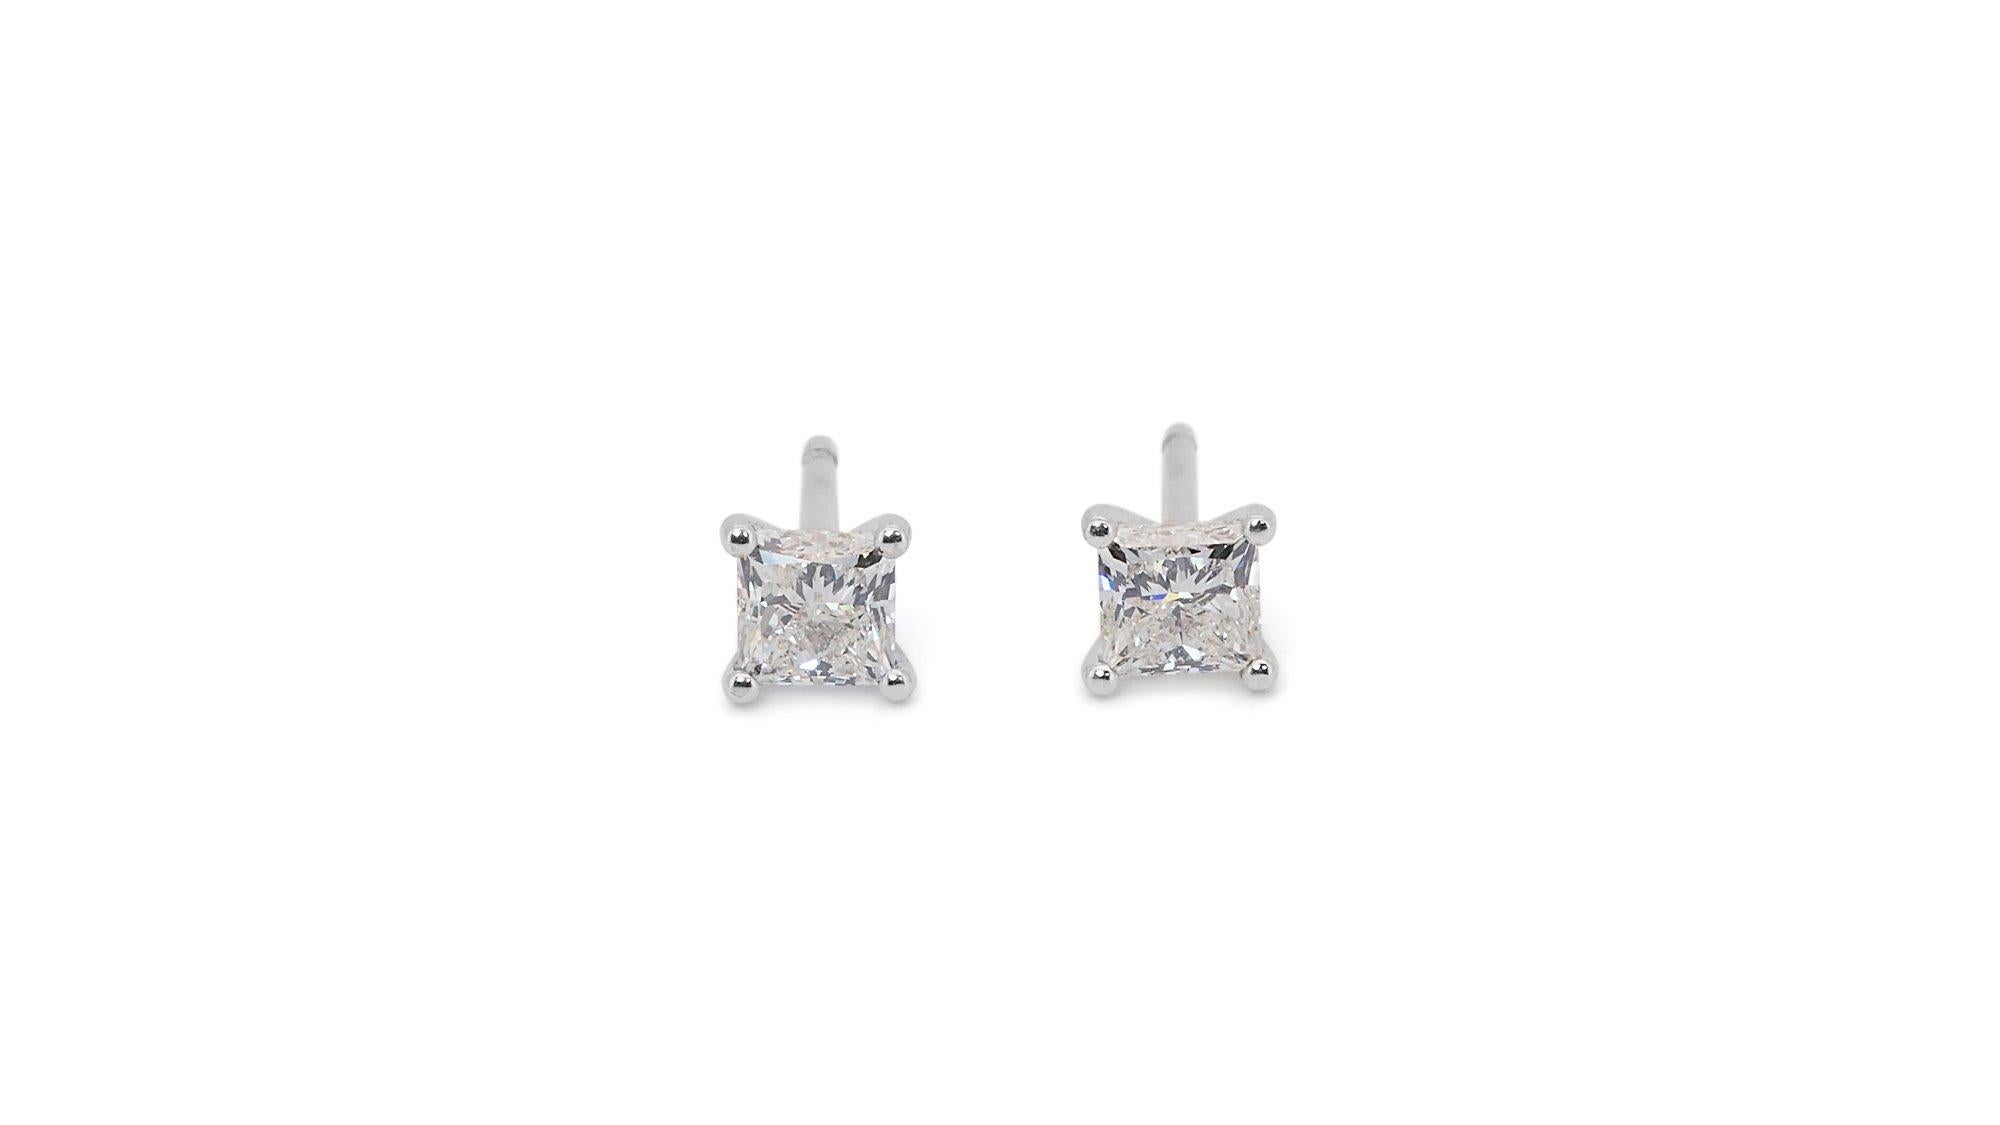 A beautiful pair of stud earrings with a dazzling pair of 0.85 carat natural princess diamonds in H VS1. The jewelry is made of 18K White gold with a high quality polish. It comes with AIG certificate and a fancy jewelry box.

2 diamond main stone